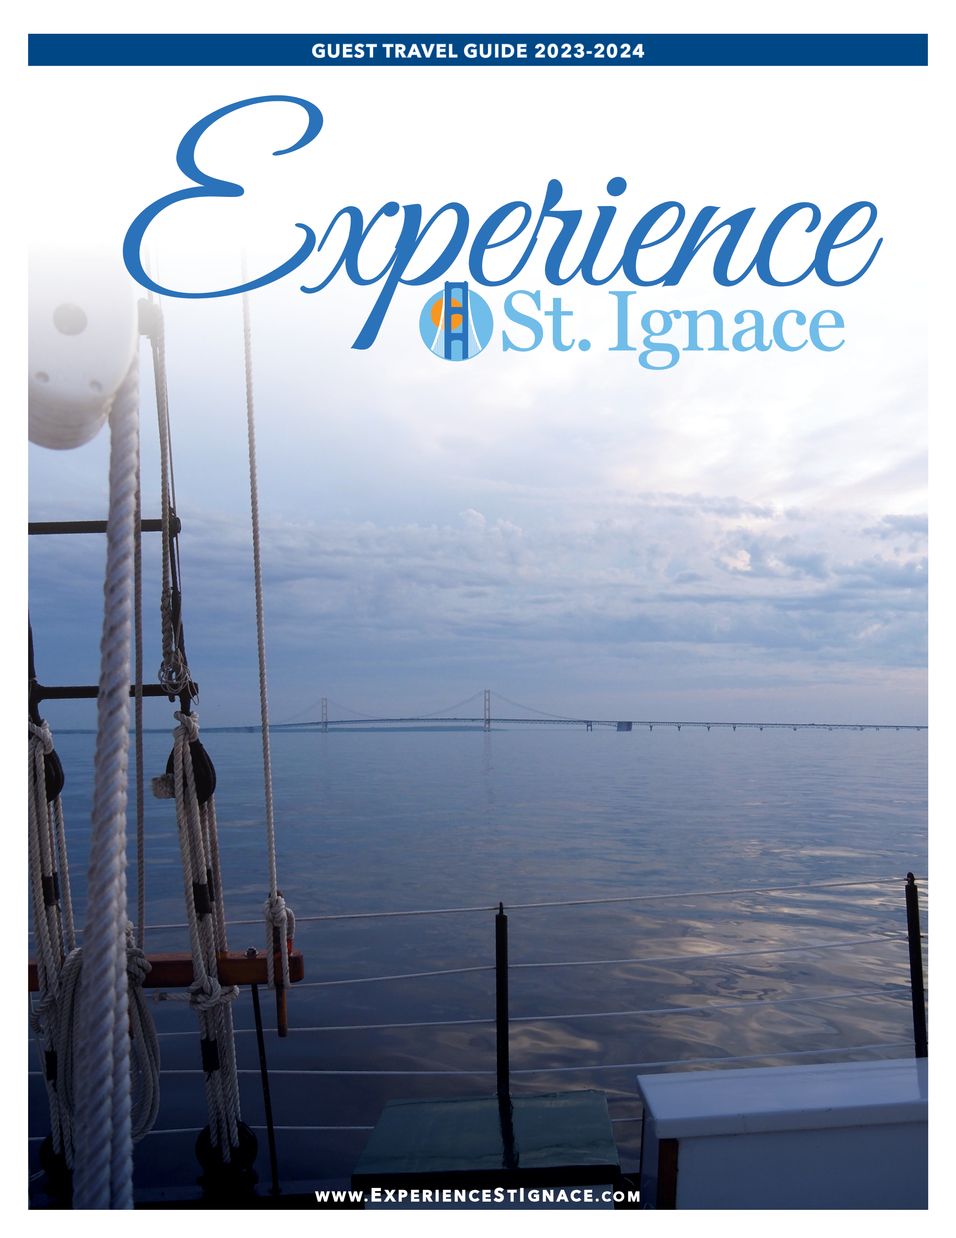 Experience St. Ignace - Guest Travel Guide 2023 - page 1